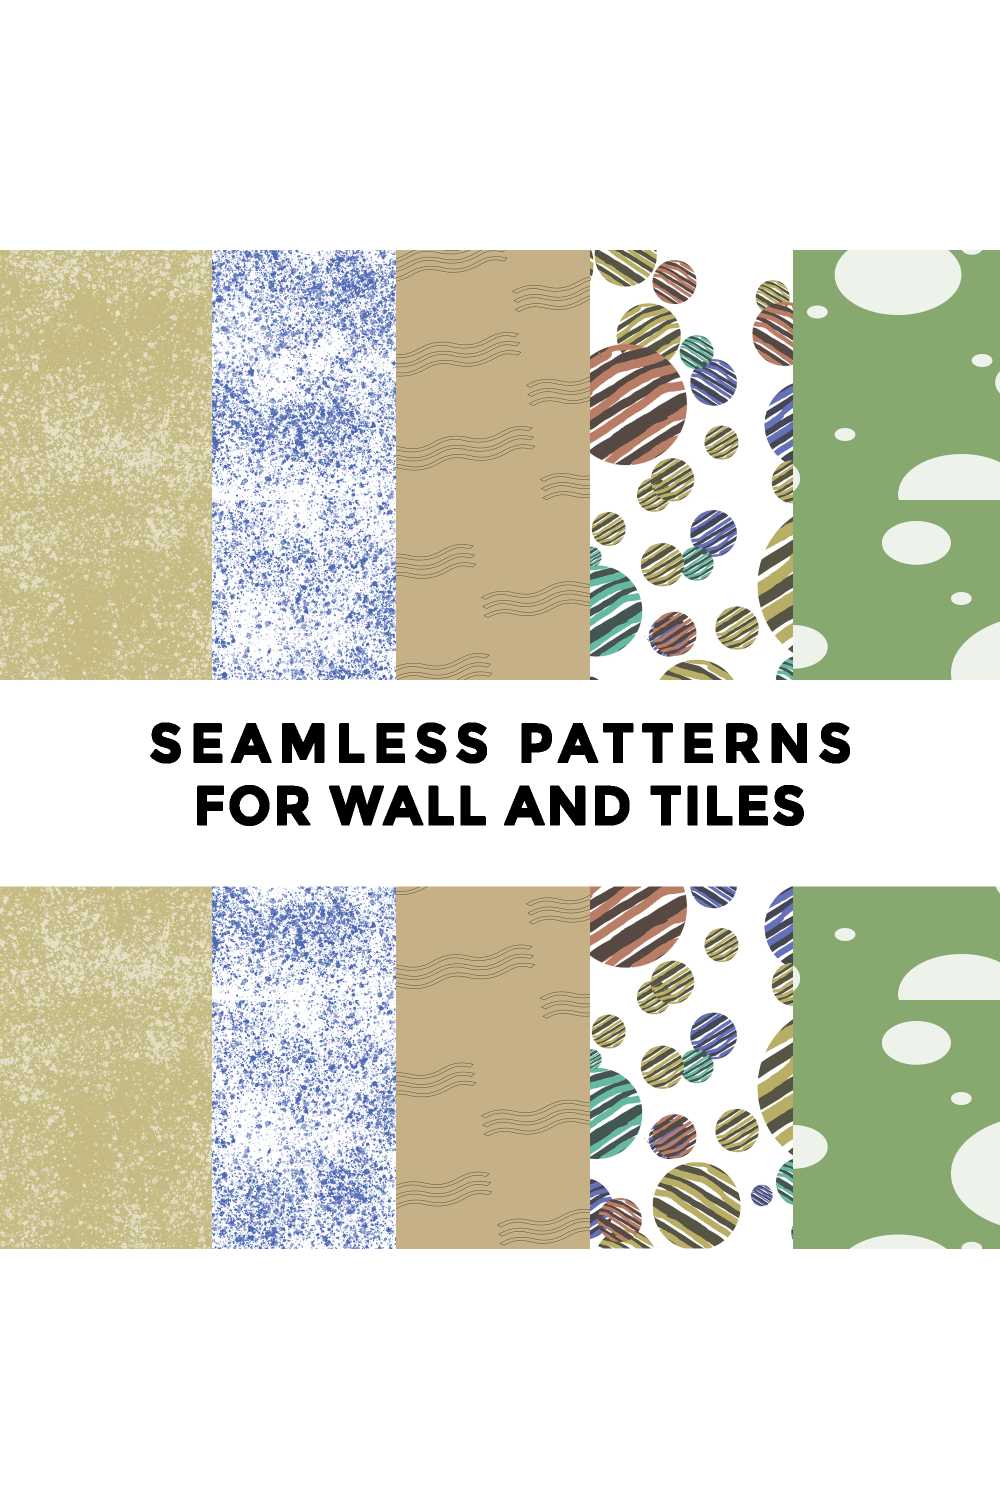 Seamless interior wall designs pinterest preview image.